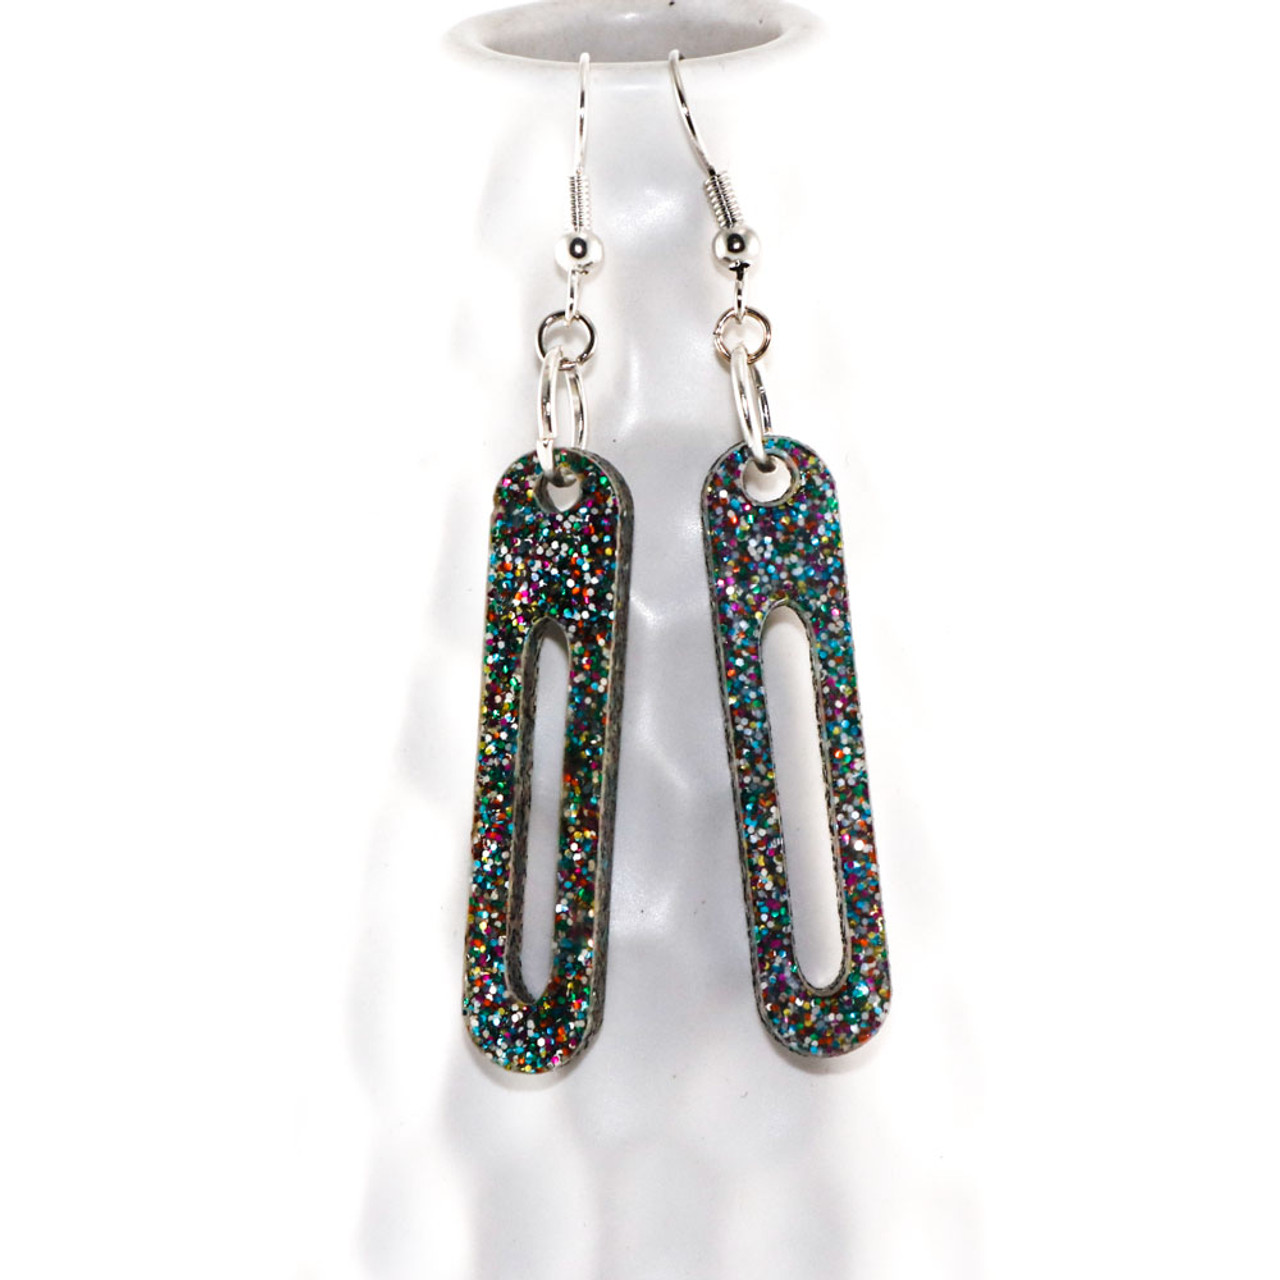 Share more than 206 black sparkly dangle earrings super hot